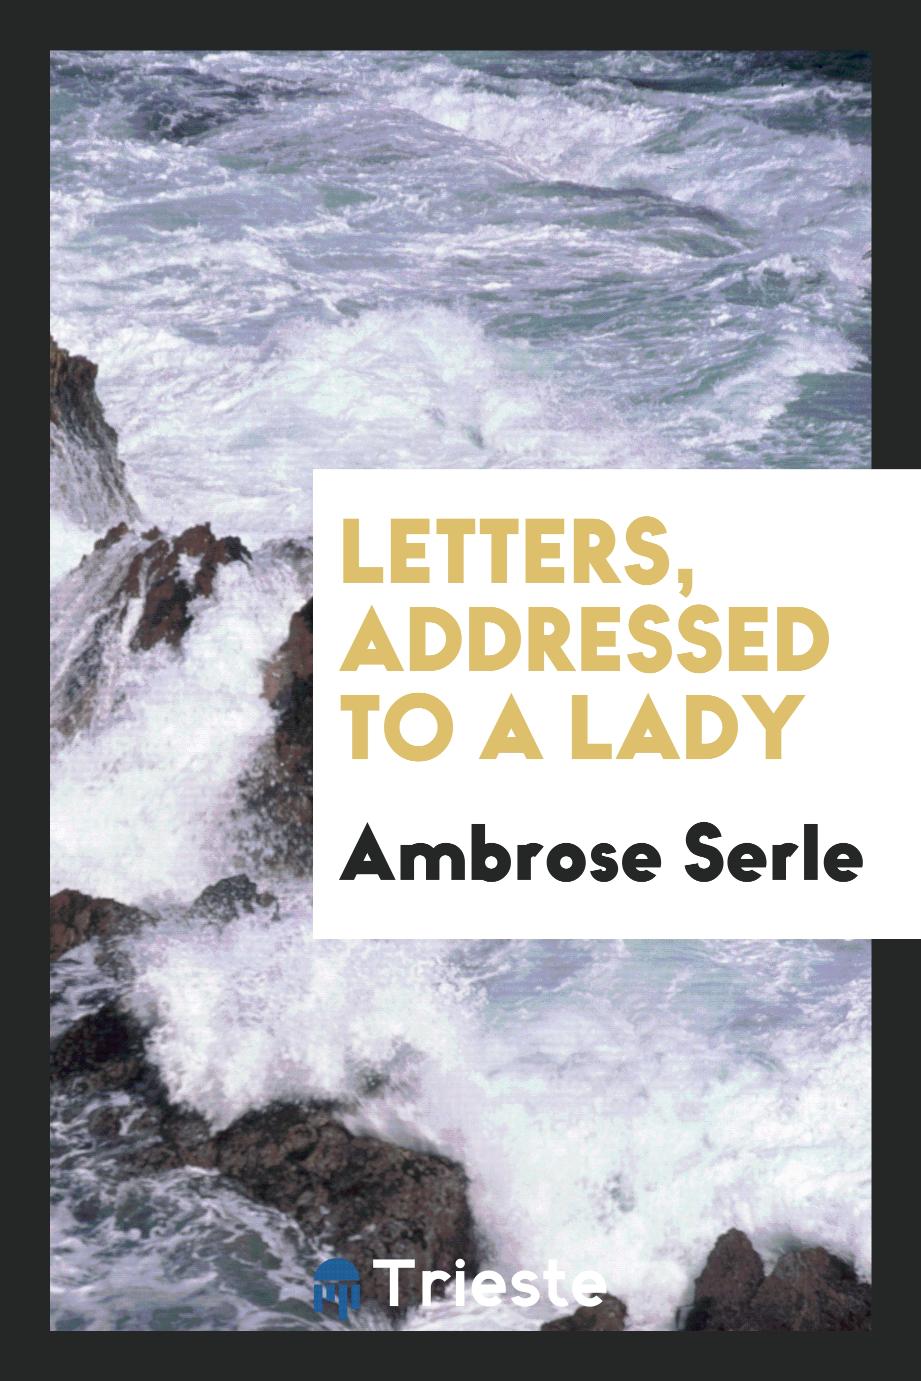 Letters, addressed to a lady